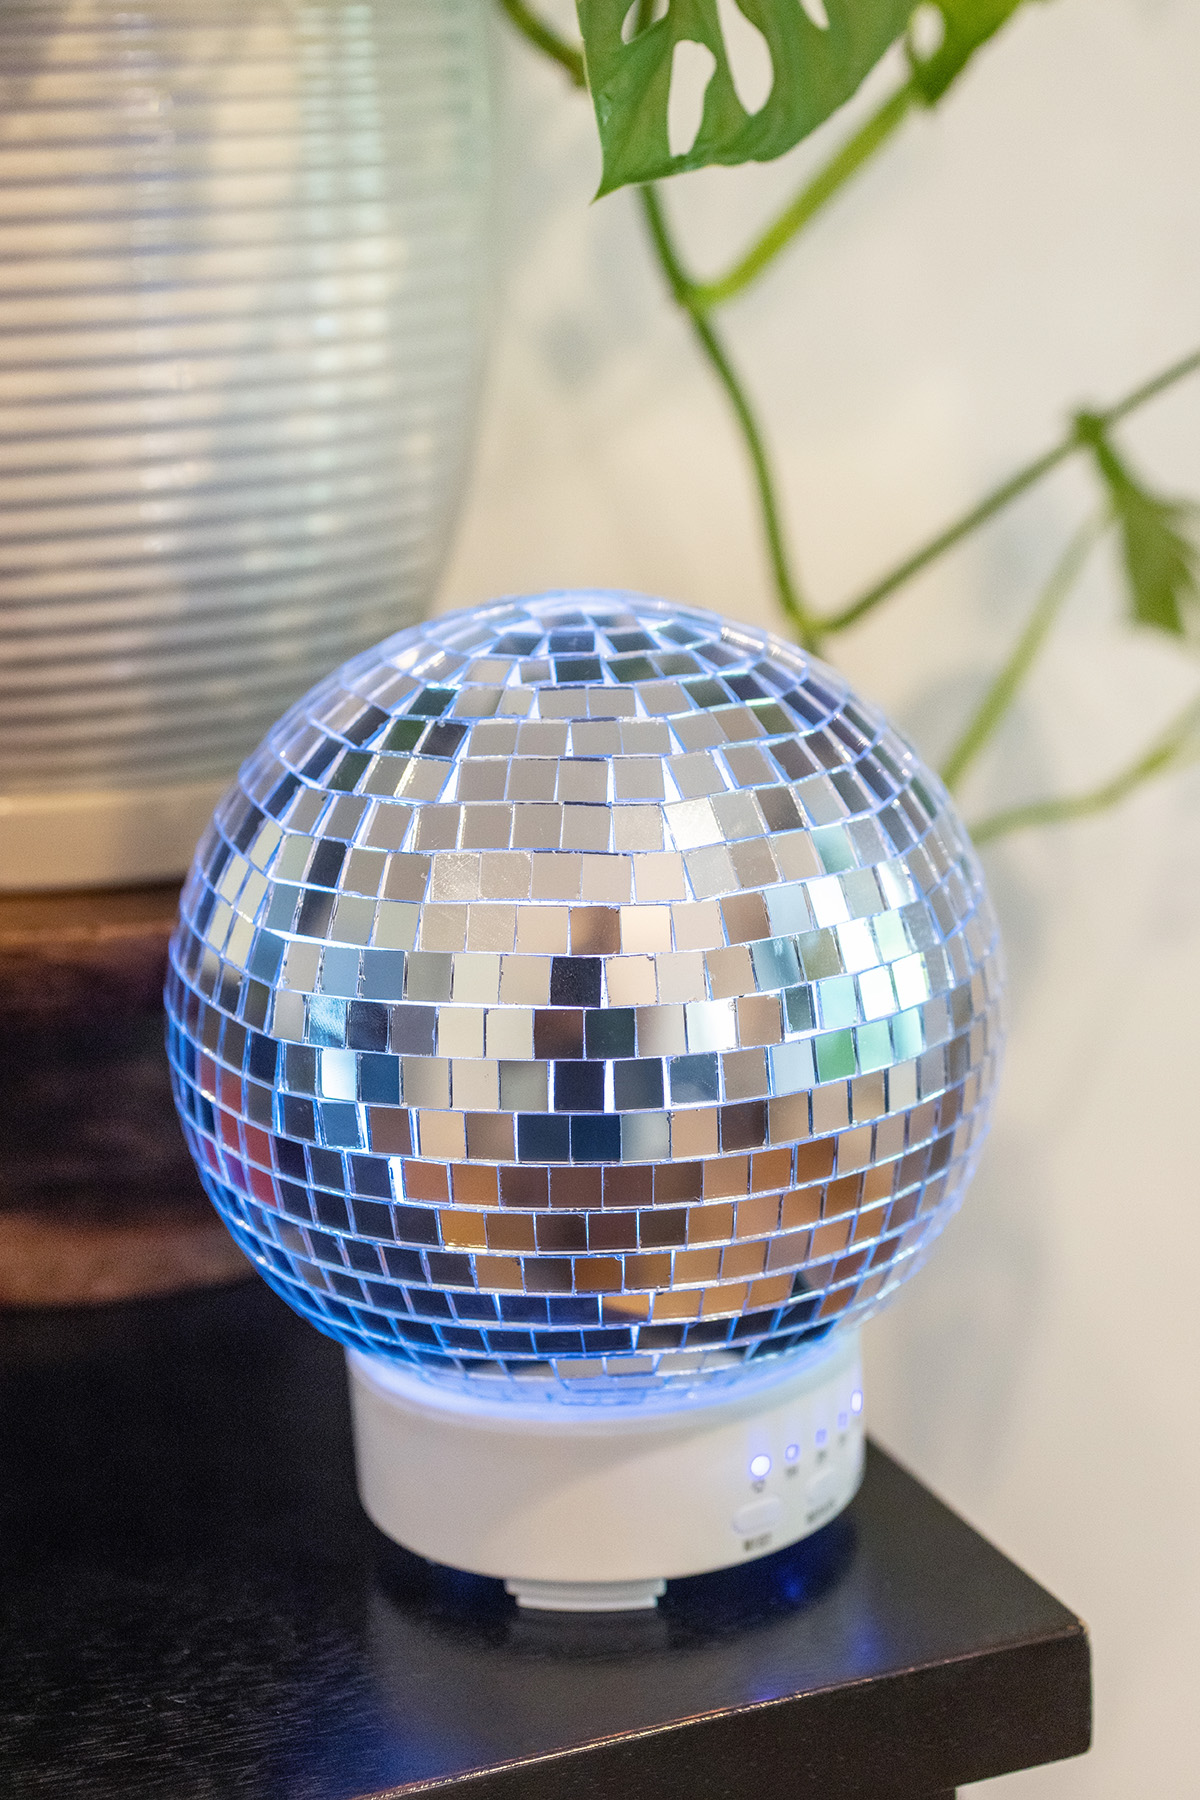 Disco ball Diffuser Humidifier Pink or Silver — Stayin' Alive Succulents